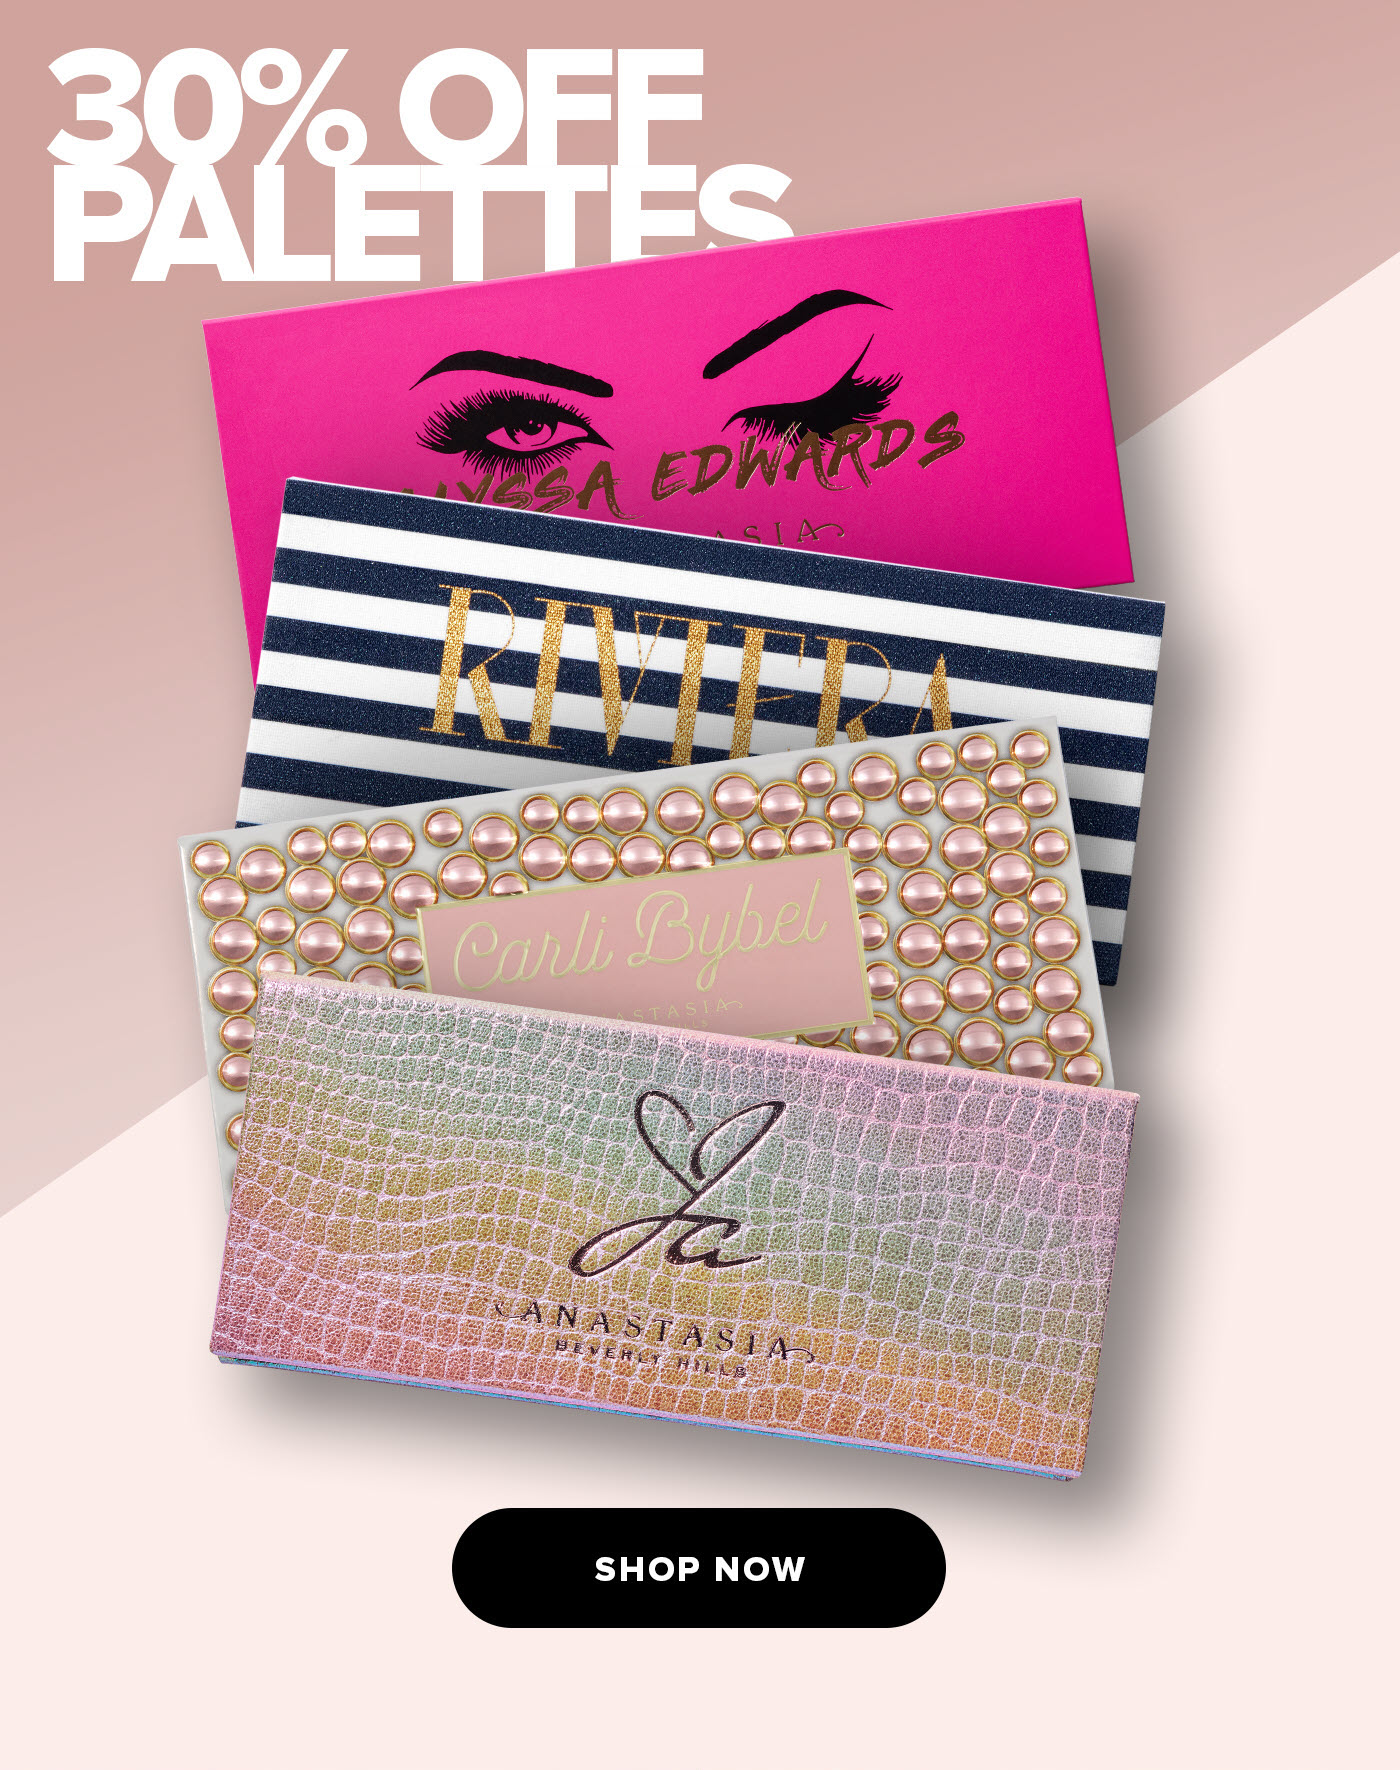 30% Off The Palettes You''ve Been Eyeing! Shop Now